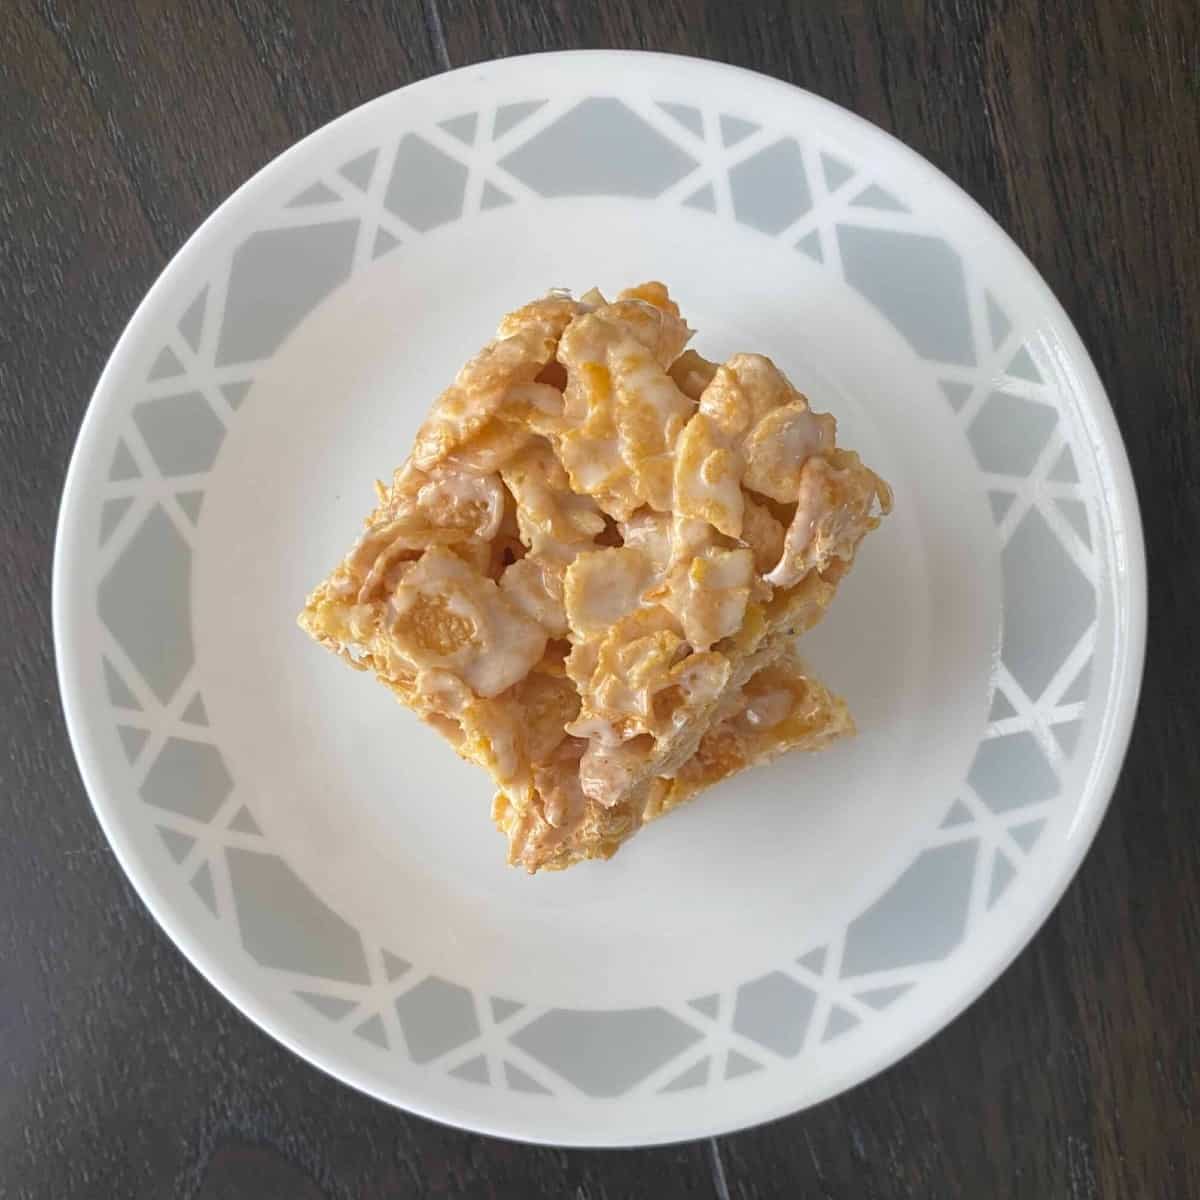 A close-up photo of a plate filled with homemade Frosted Flake treats. The treats are square-shaped and golden brown, with visible pieces of frosted corn flakes. They are arranged in a single layer on a white plate with a patterned blue rim.